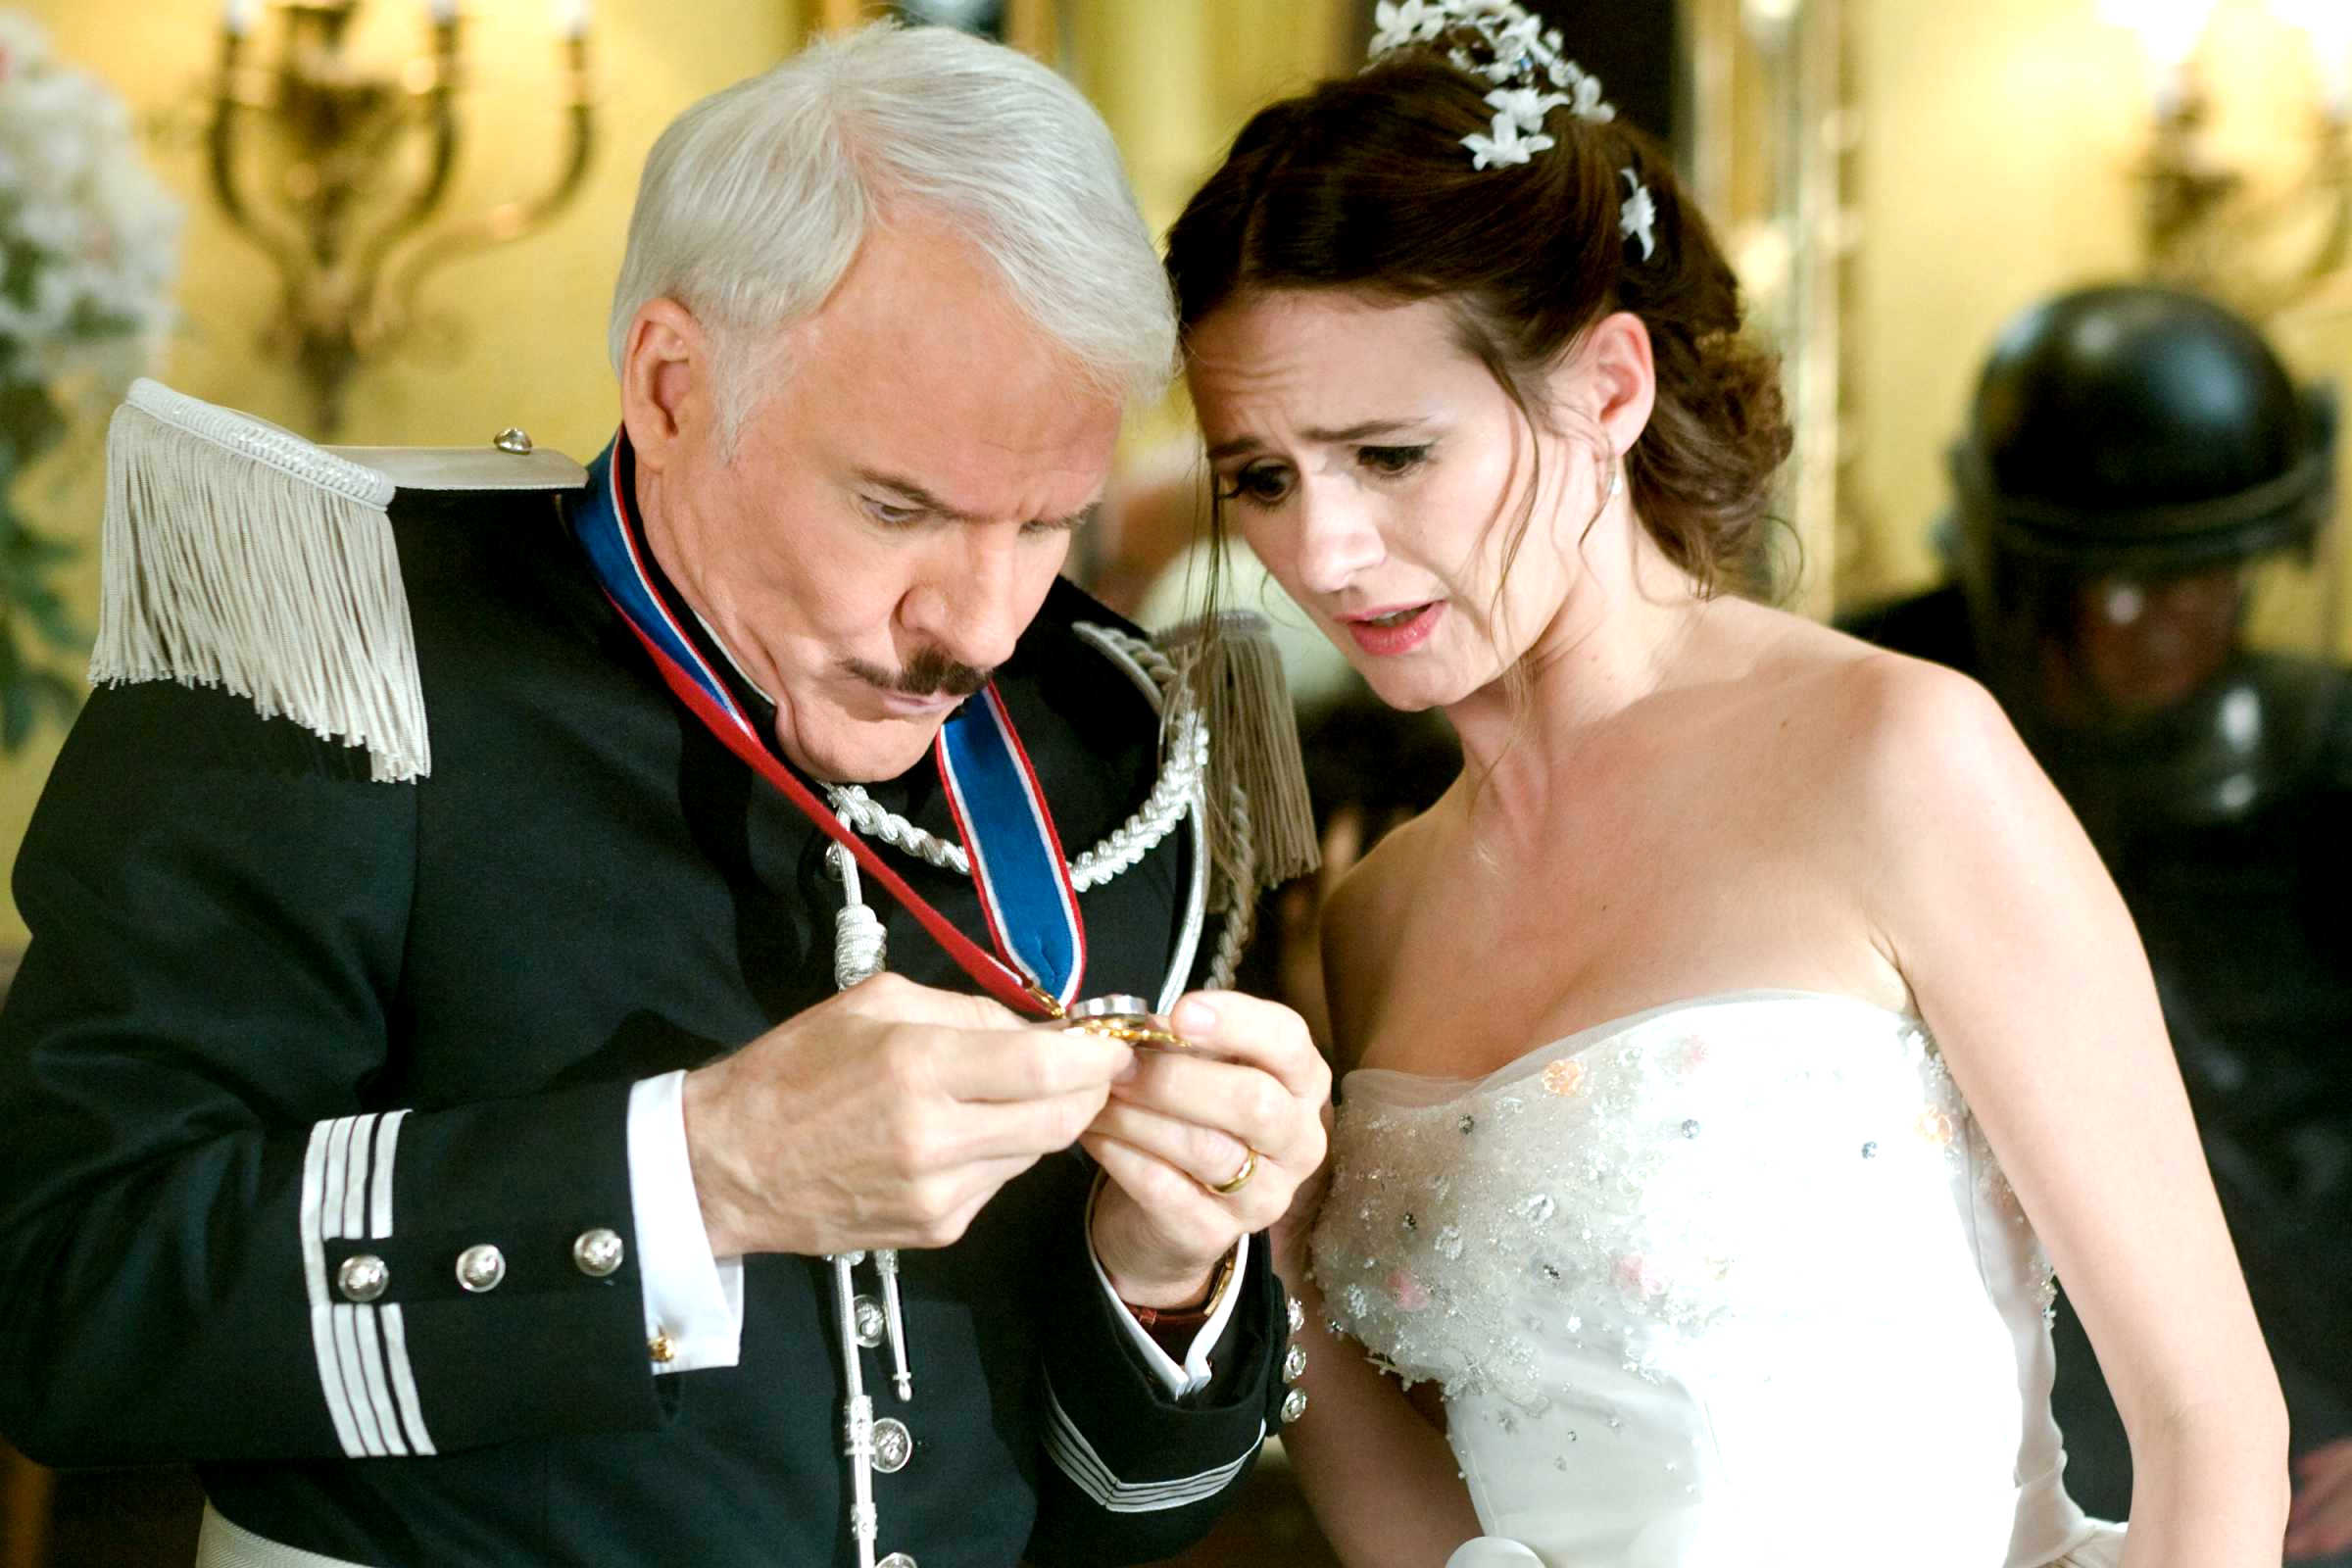 Steve Martin stars as Inspector Jacques Clouseau and Emily Mortimer stars as Nicole in Columbia Pictures' The Pink Panther 2 (2009). Photo credit by Peter Iovino.